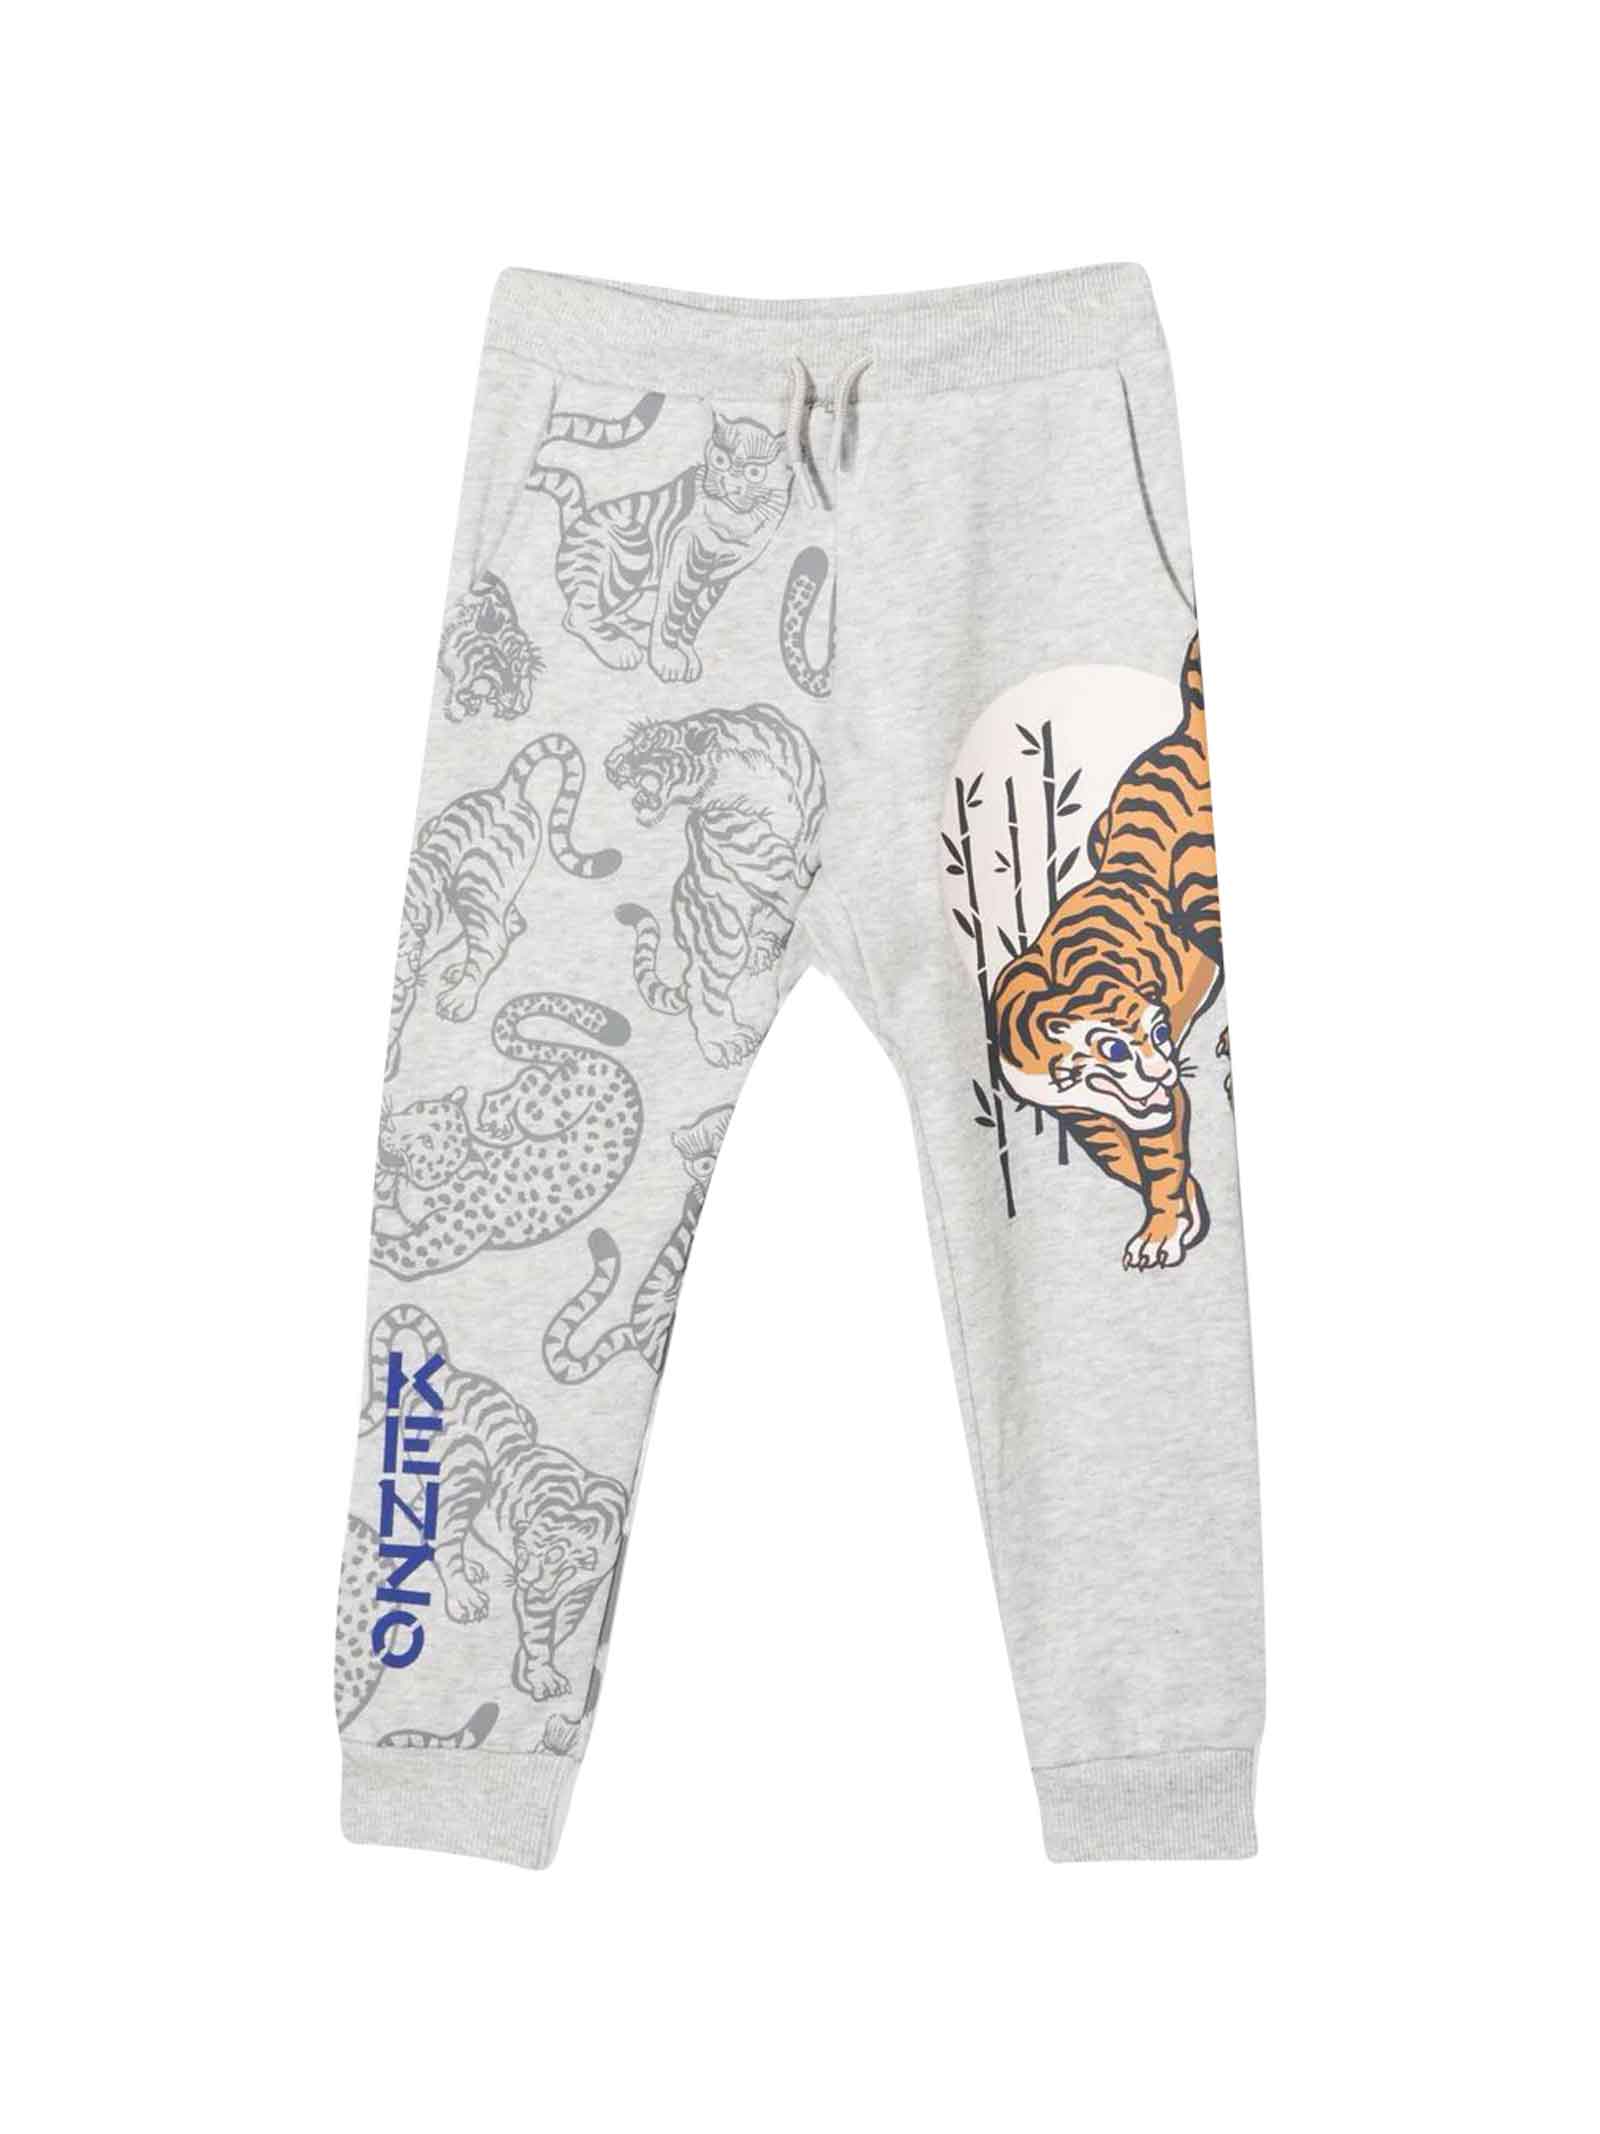 Kenzo Kids Grey Newborn Joggers With Tiger Print With Logo On The Leg, Waist With Elasticated Drawstring, Bellows Pockets On The Sides, Tapered Leg And Elasticat